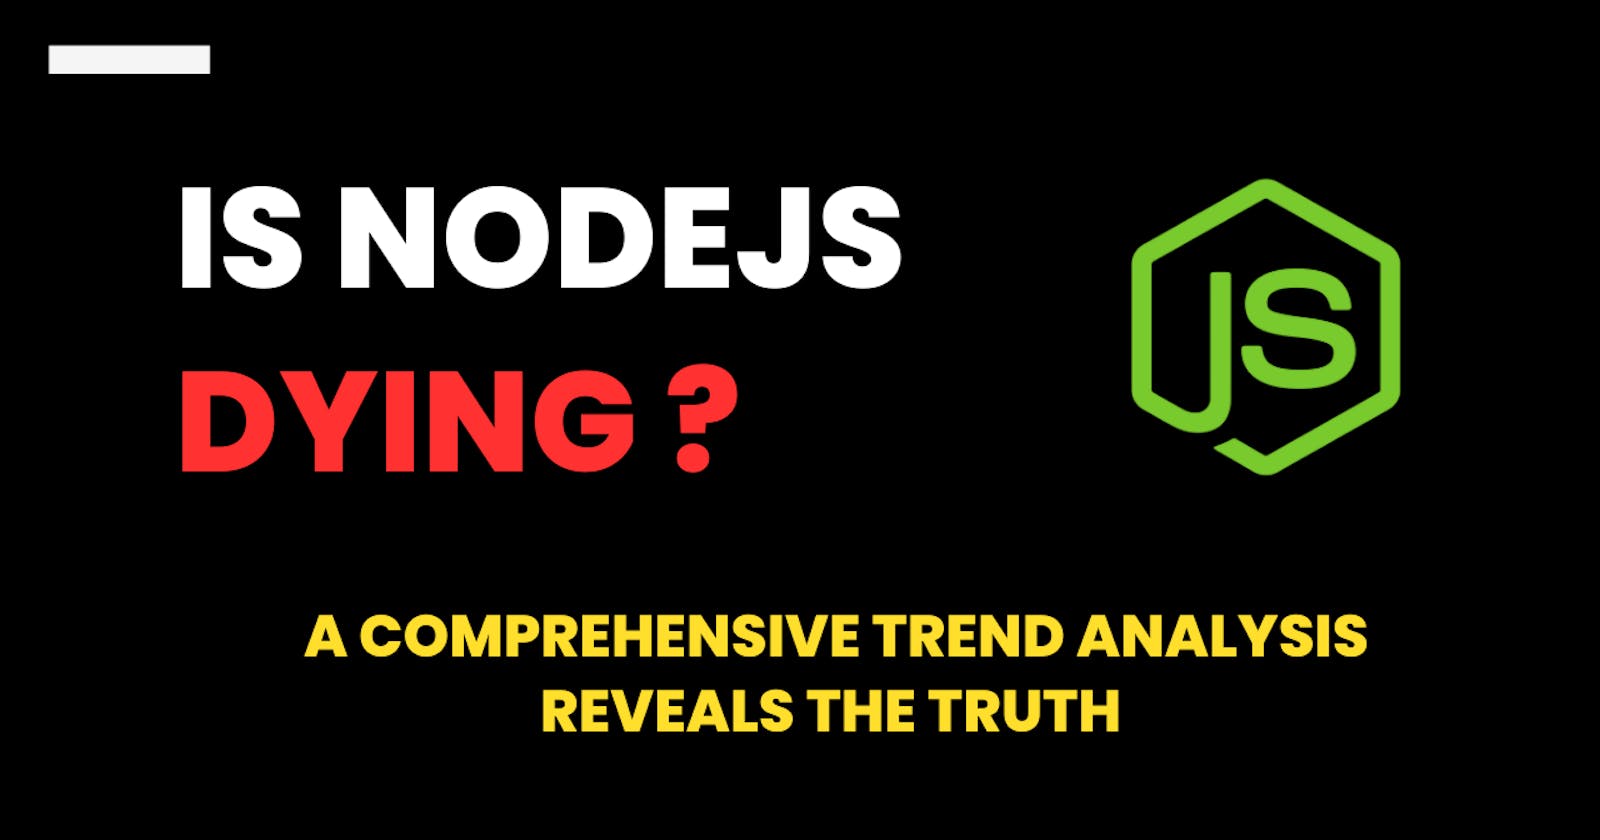 Is Node.js Dying ? Trend Analysis of Node.js in 2023